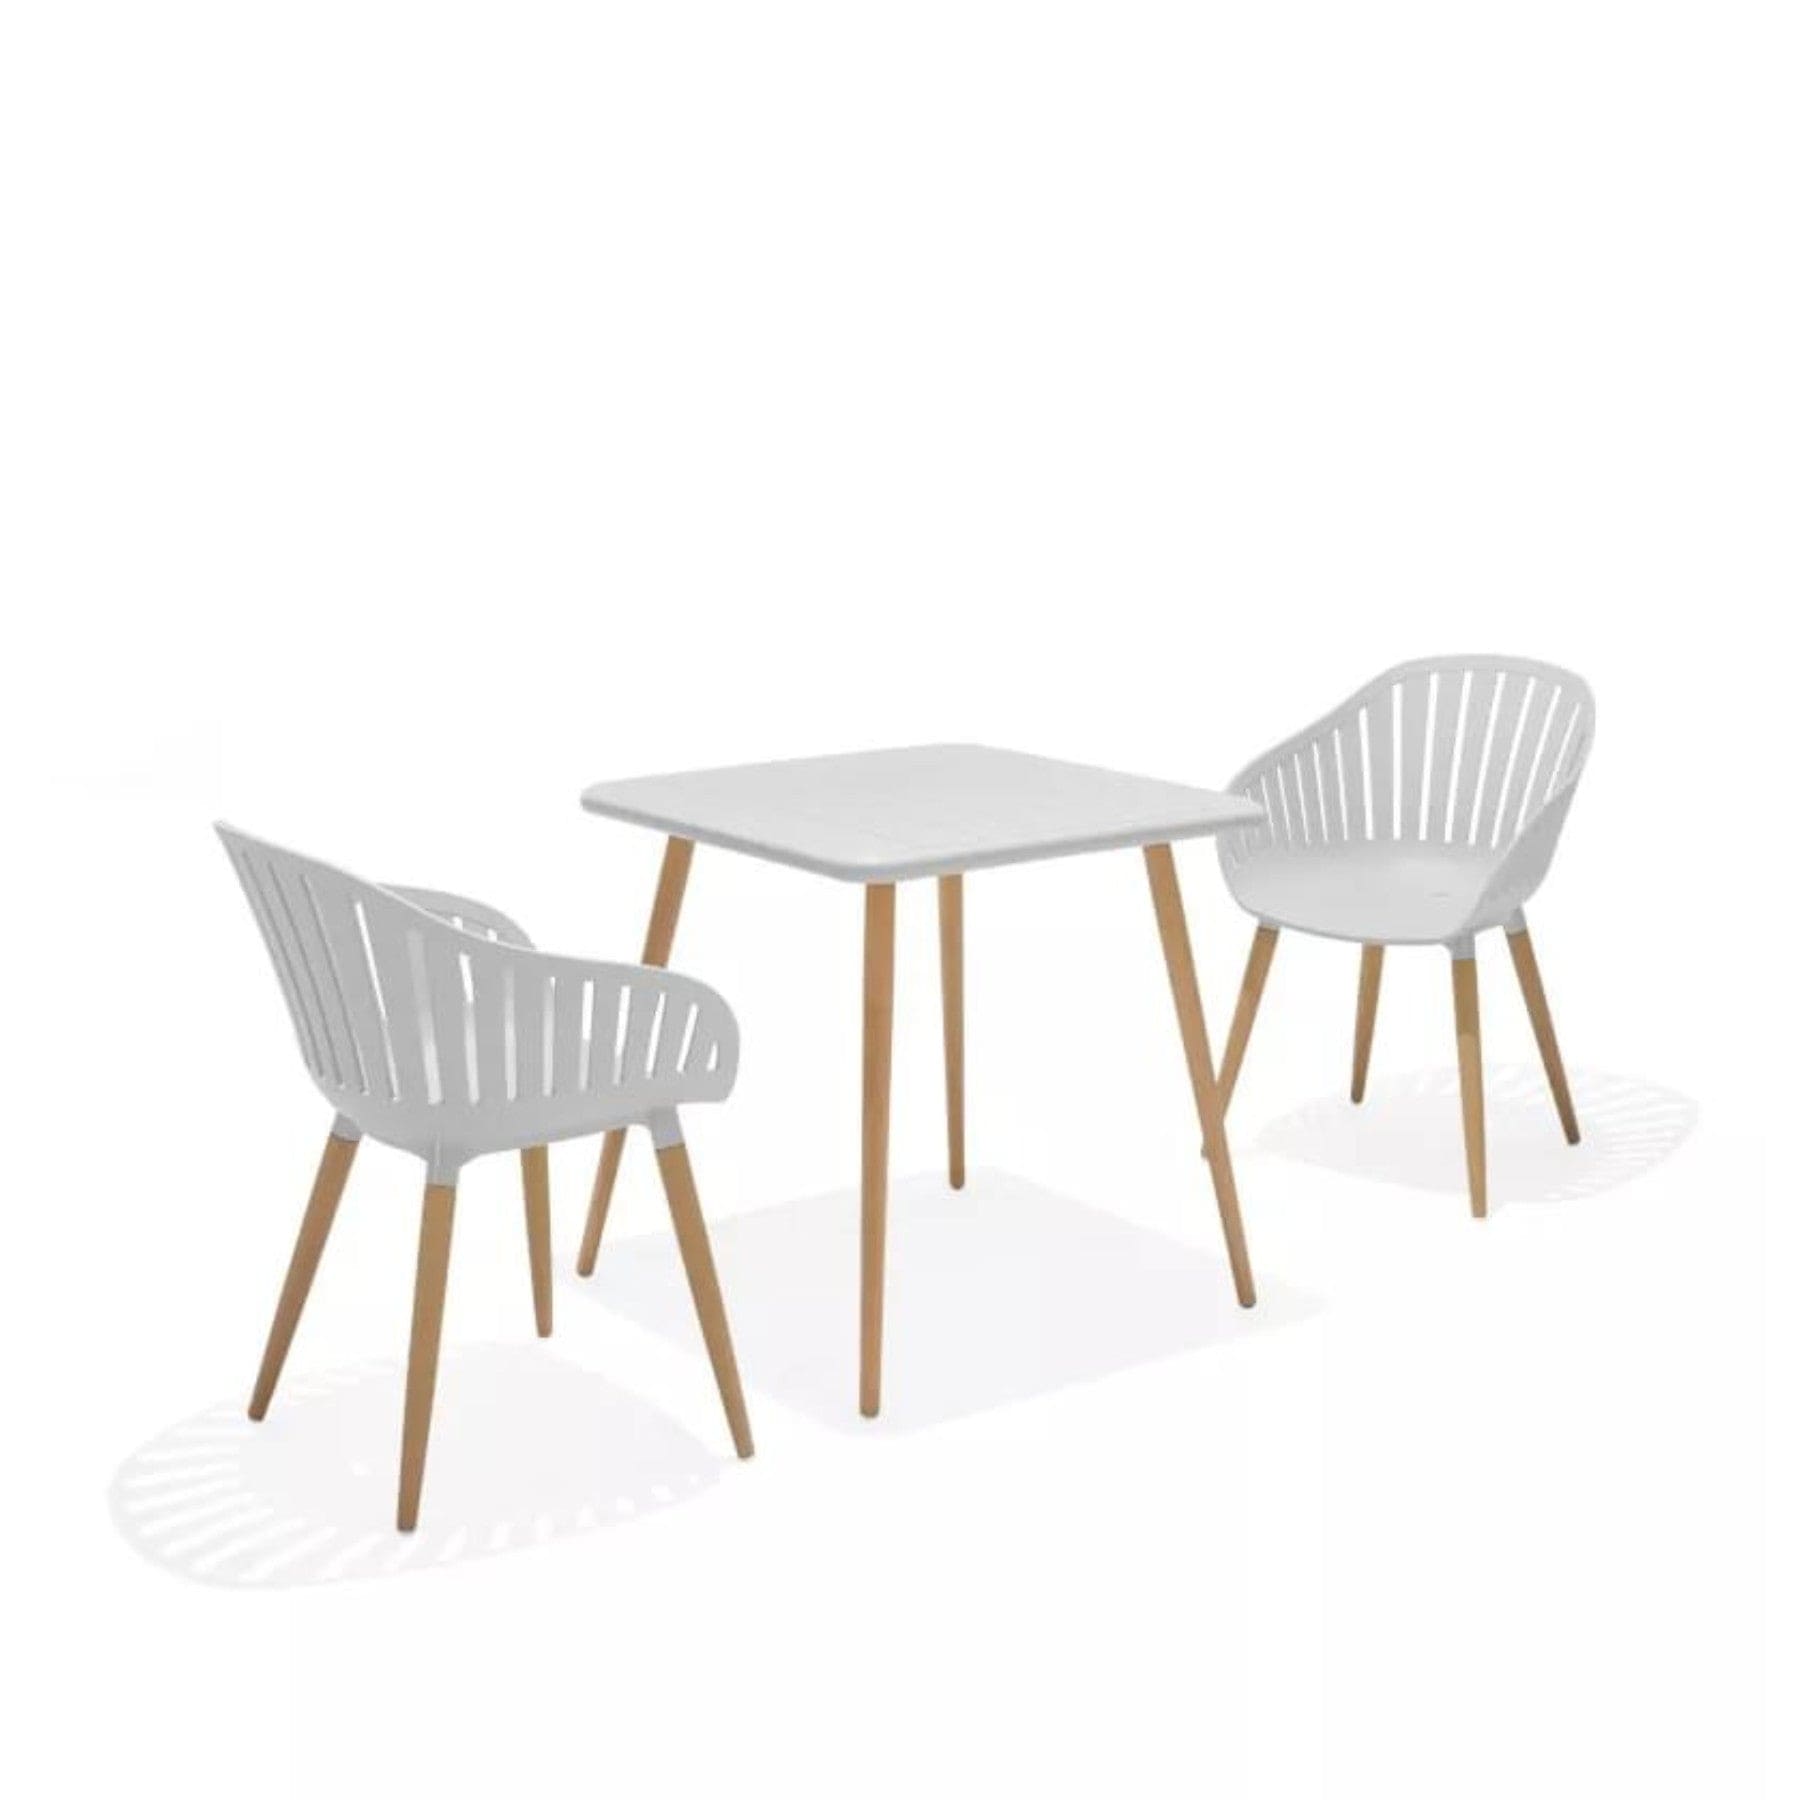 Modern minimalist dining furniture set with white square table and two grey plastic chairs with wooden legs on white background